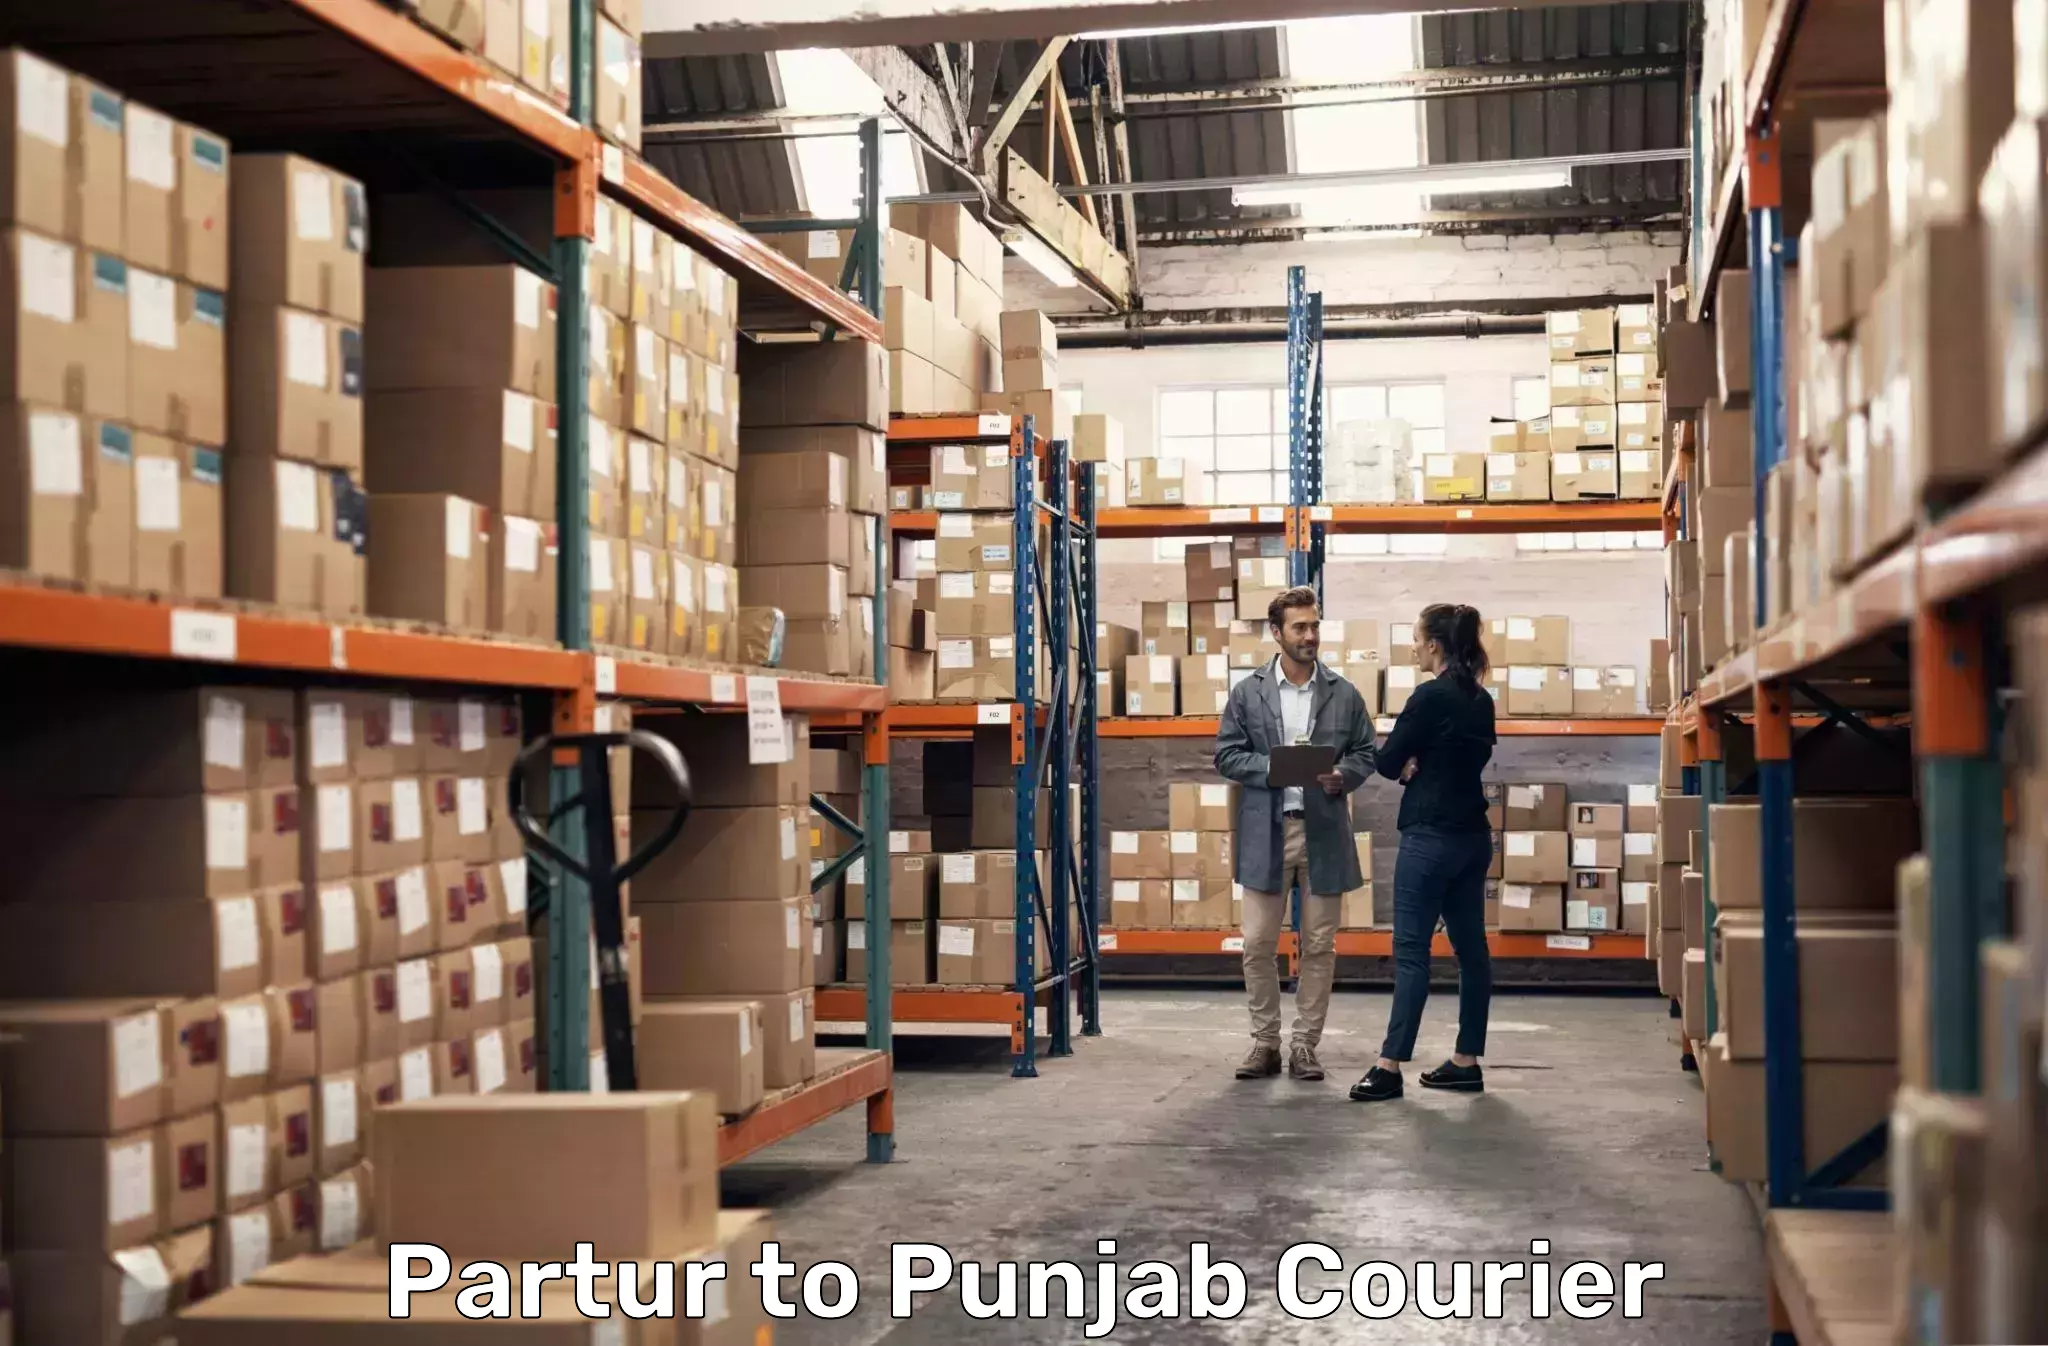 Express delivery capabilities Partur to Malout